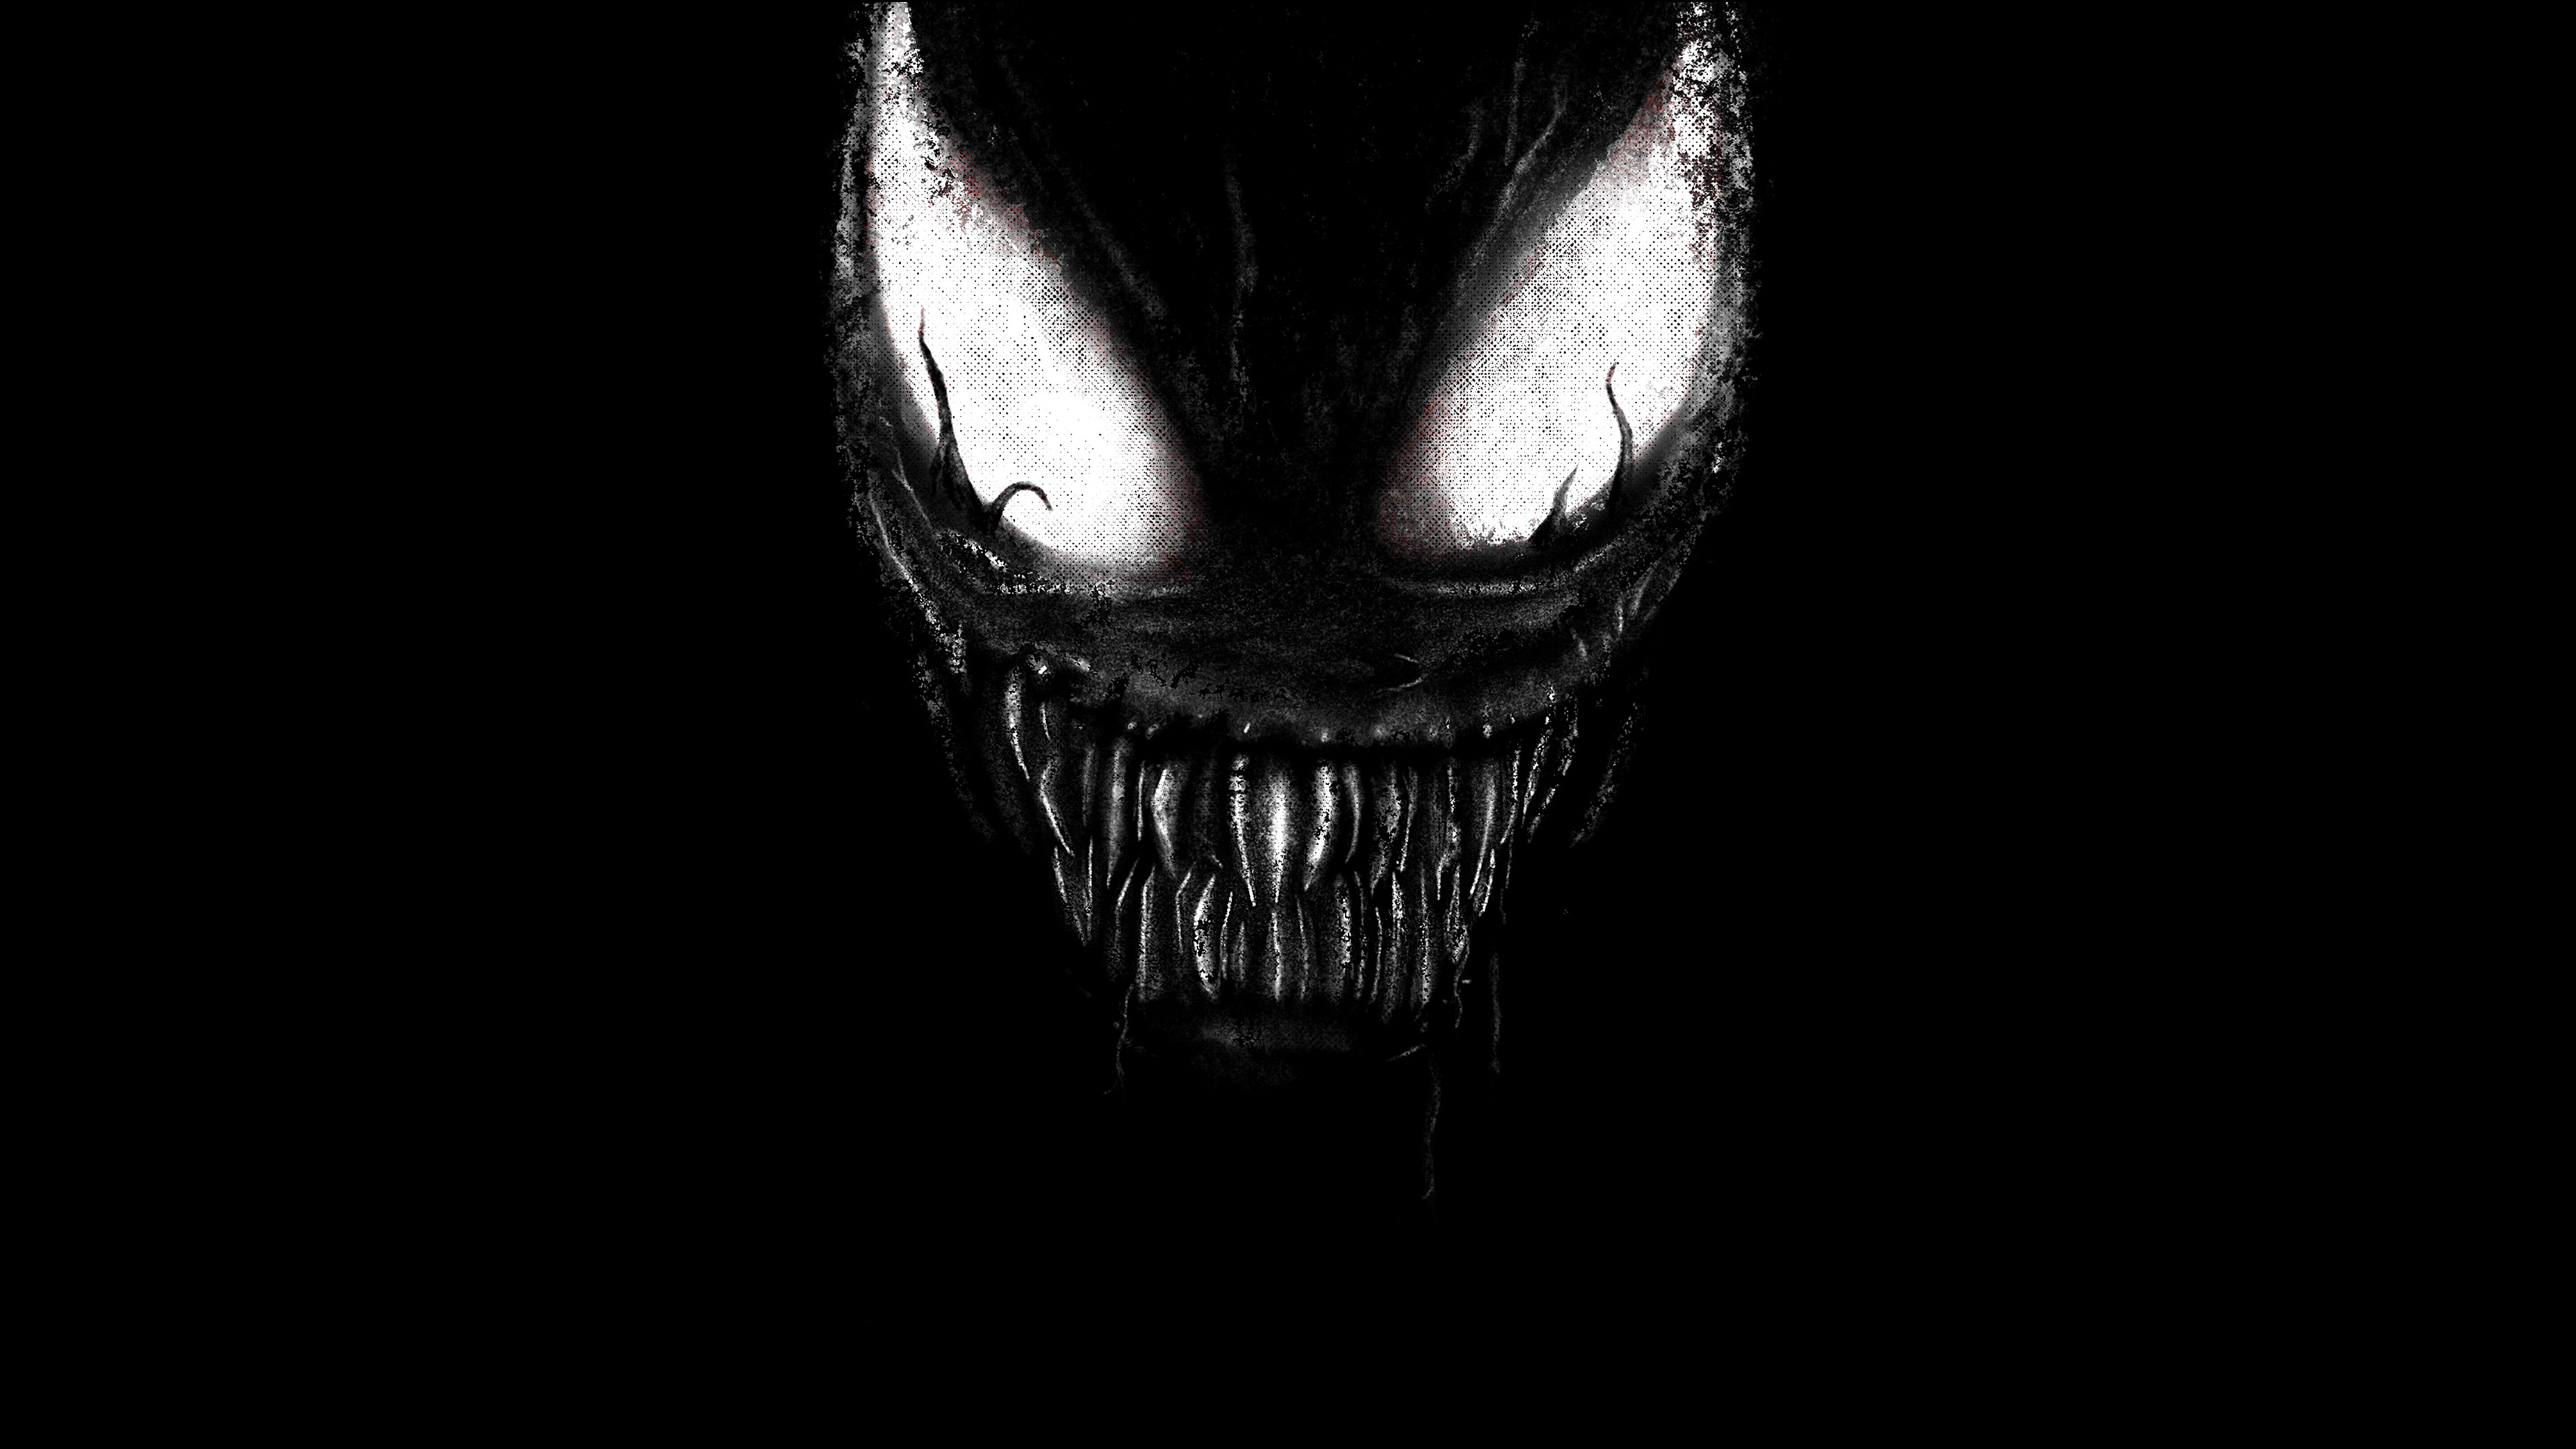 Venom 2 4K Art Wallpaper, HD Movies 4K Wallpapers, Images, Photos and